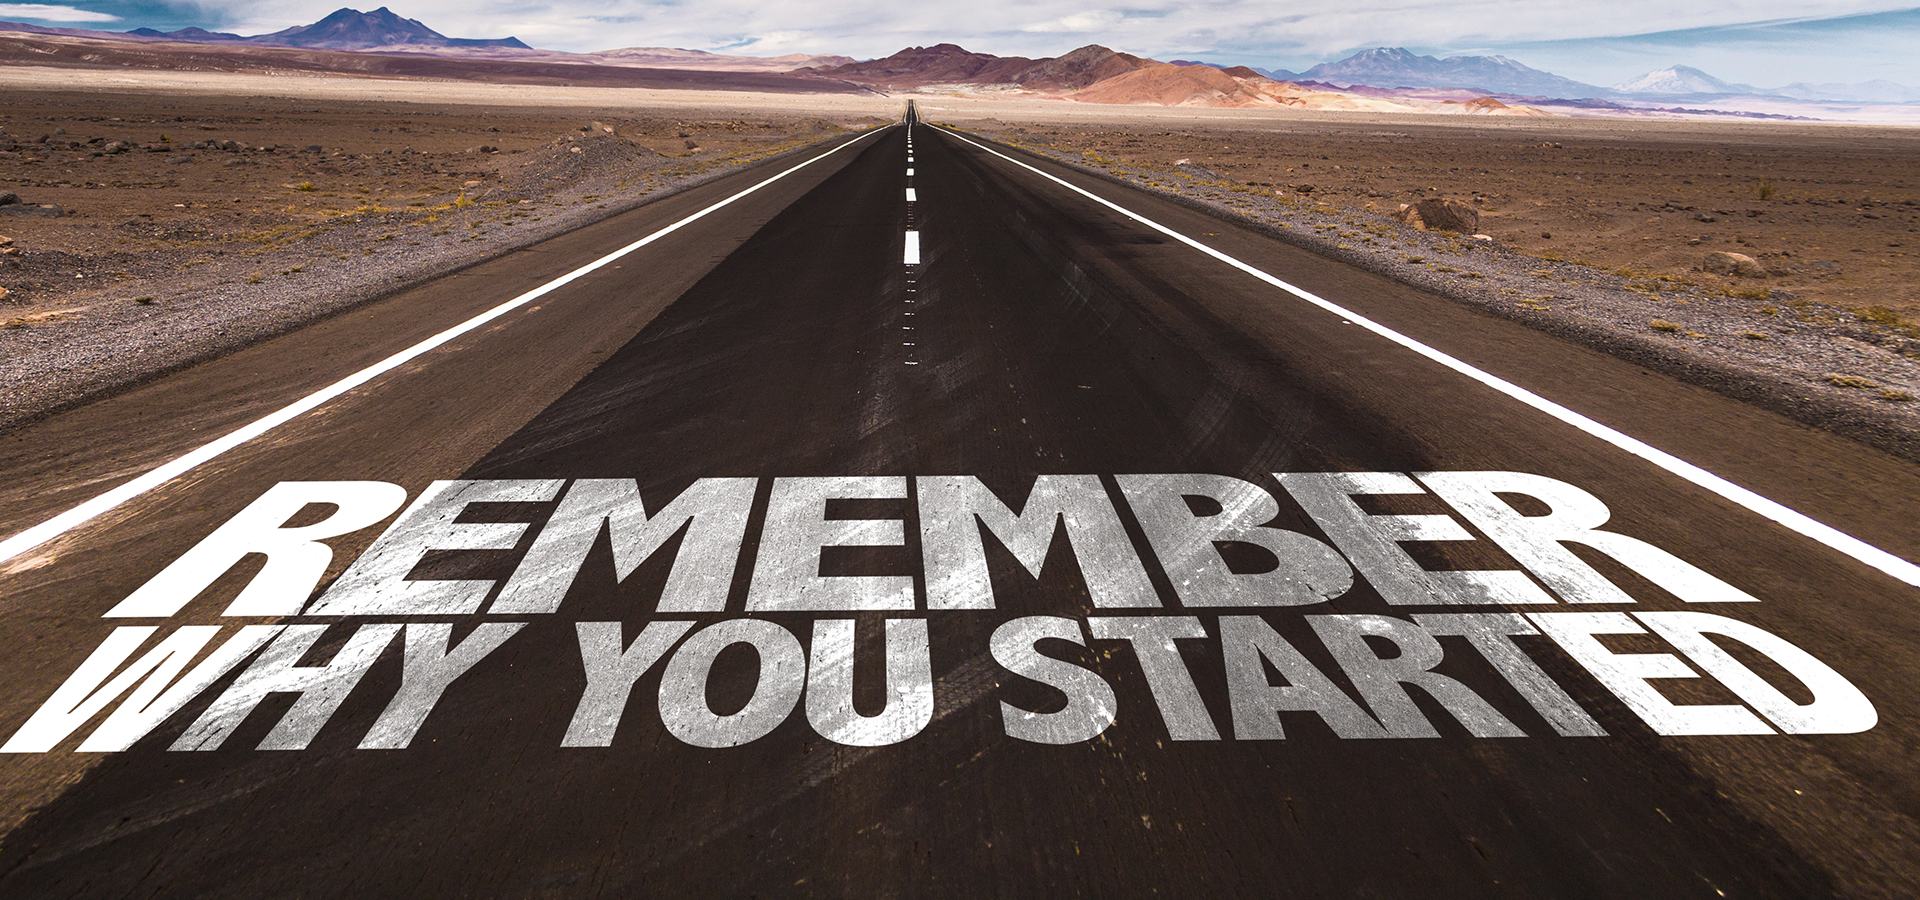 Road with the words "Remember why you started"